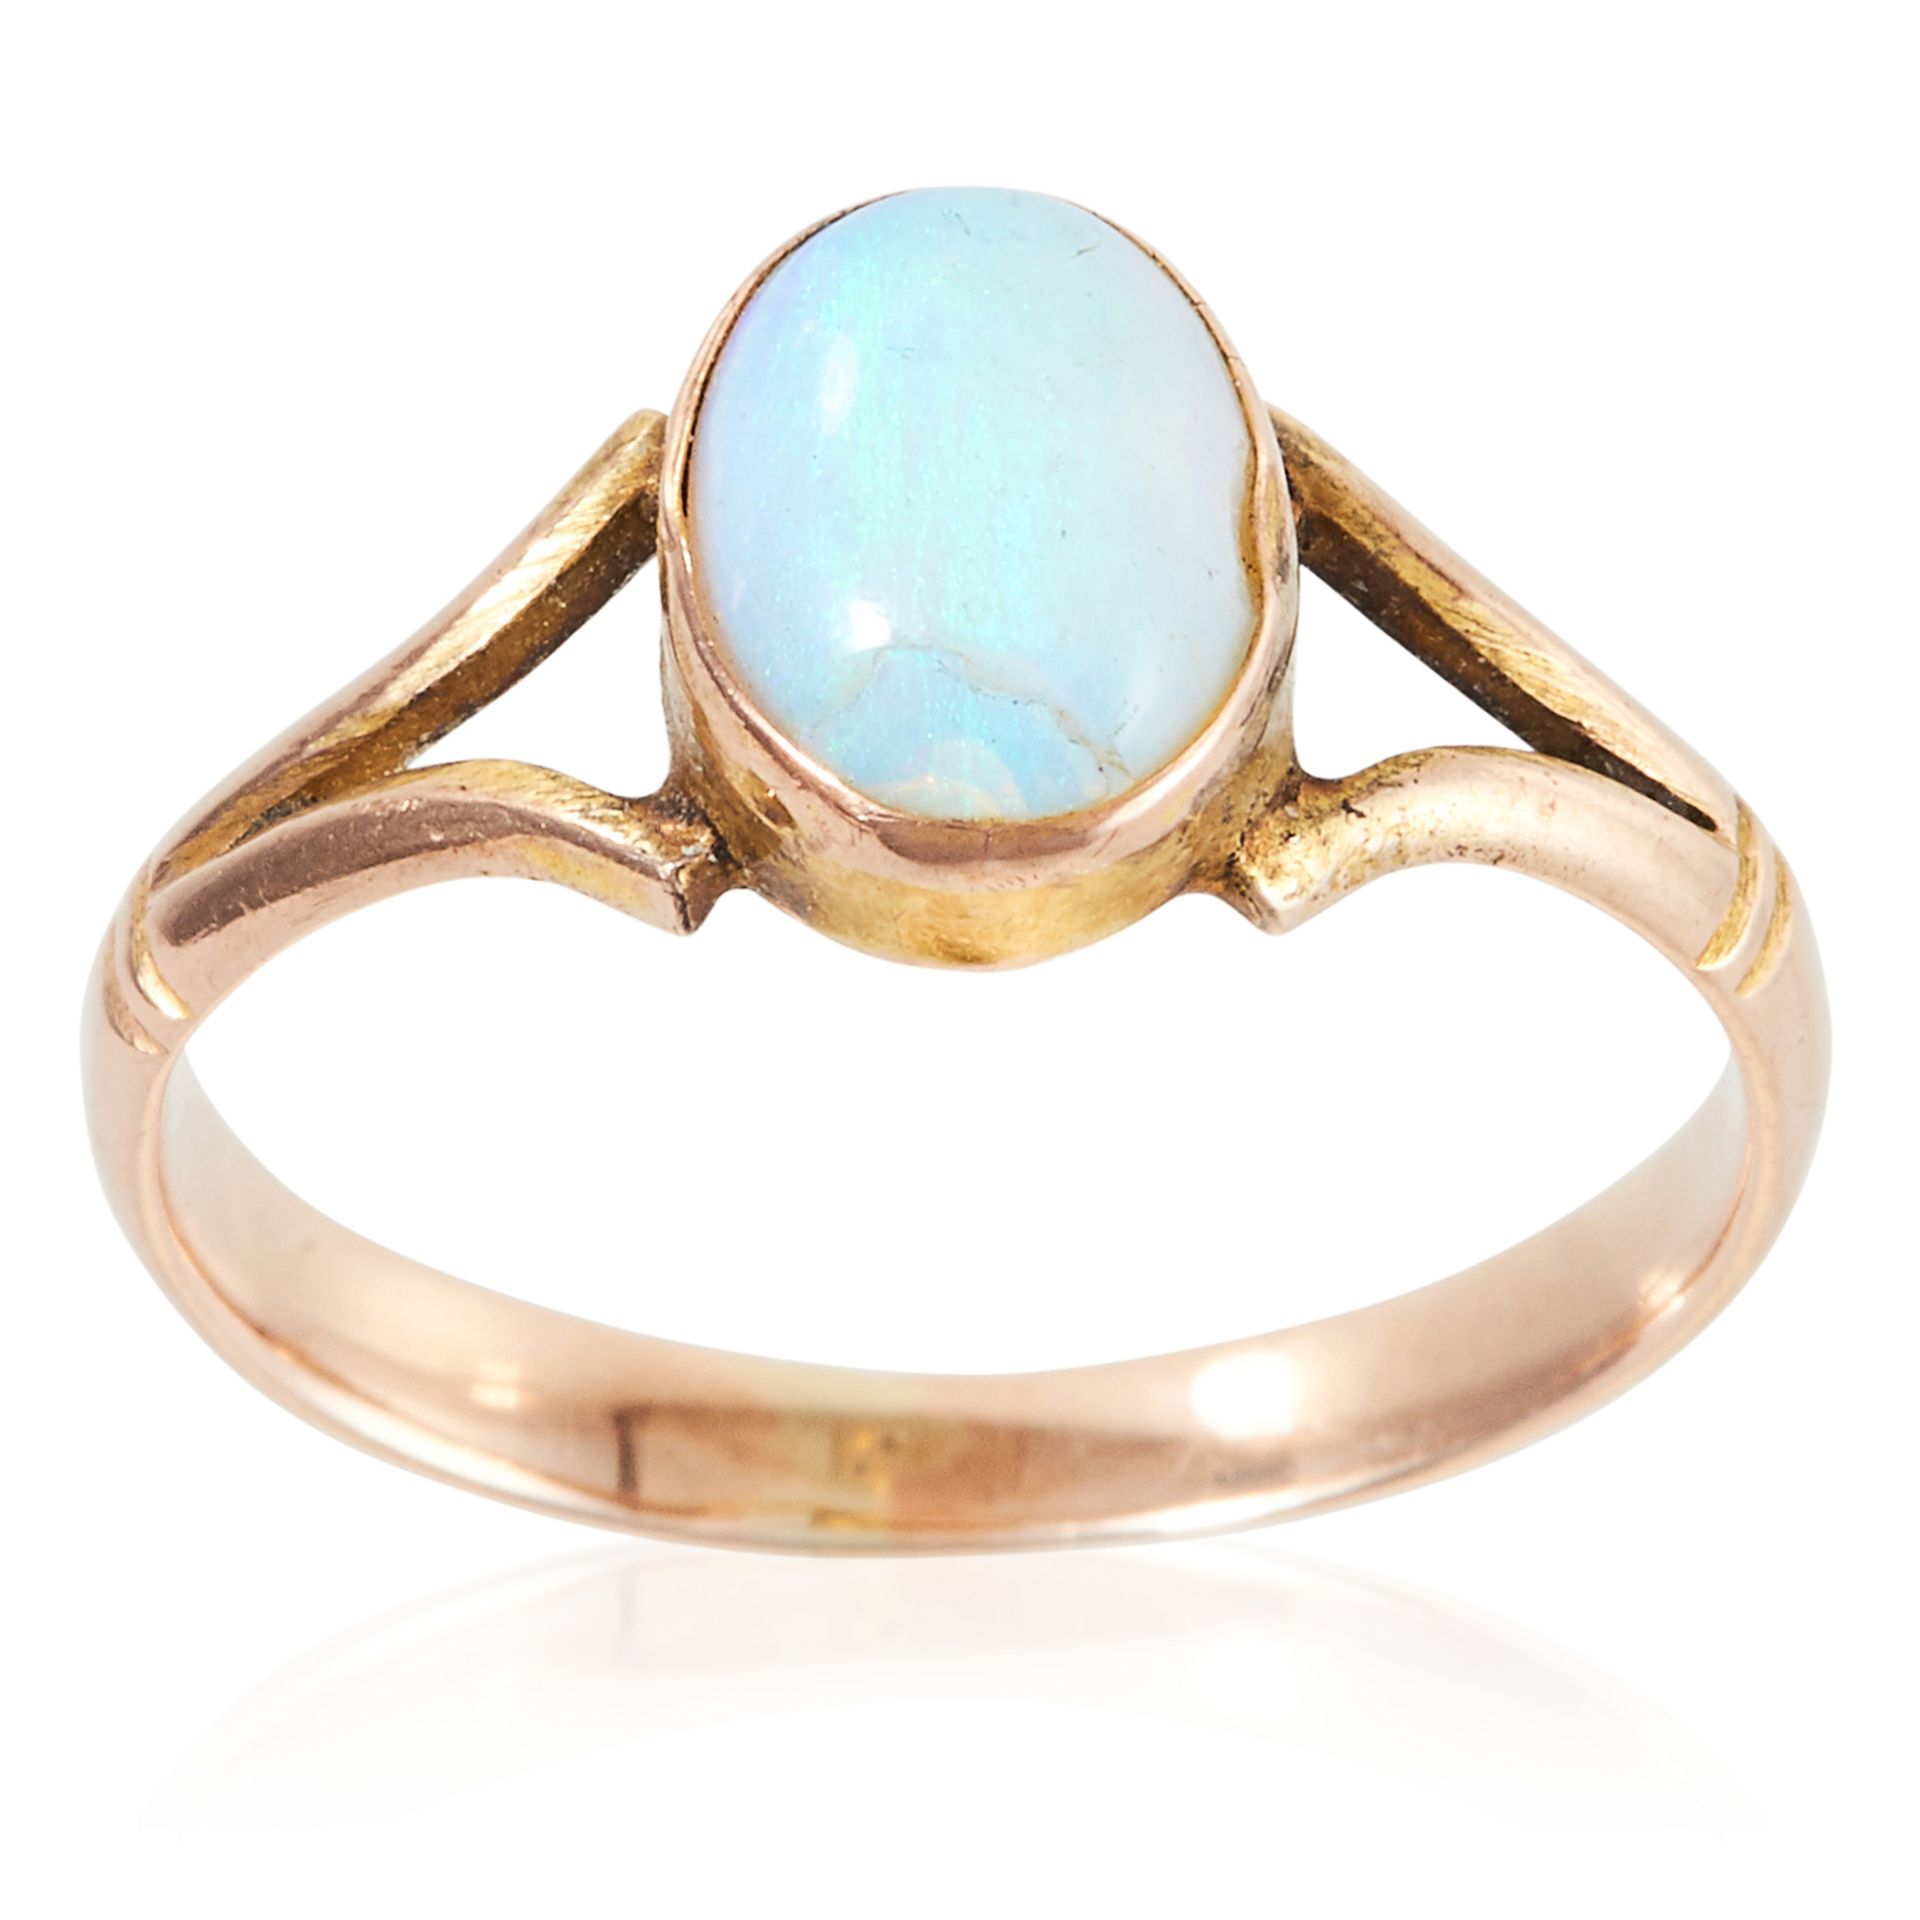 AN OPAL DRESS RING in yellow gold, set with an oval cabochon opal to a bifurcated band, unmarked,